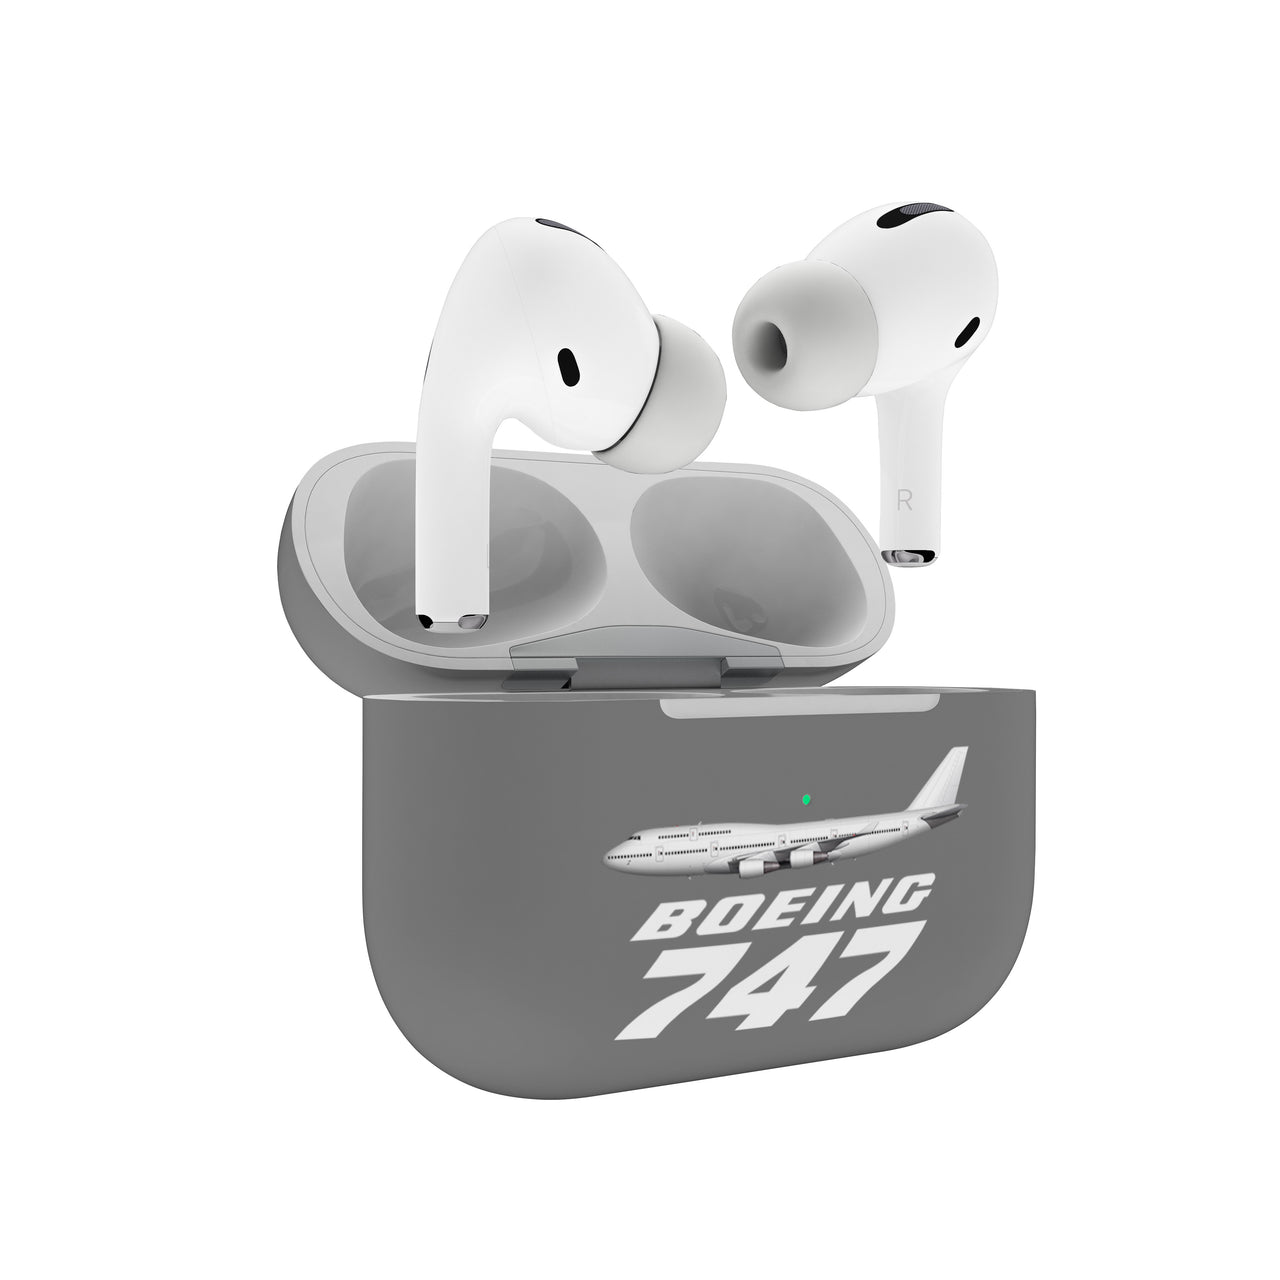 The Boeing 747 Designed AirPods  Cases